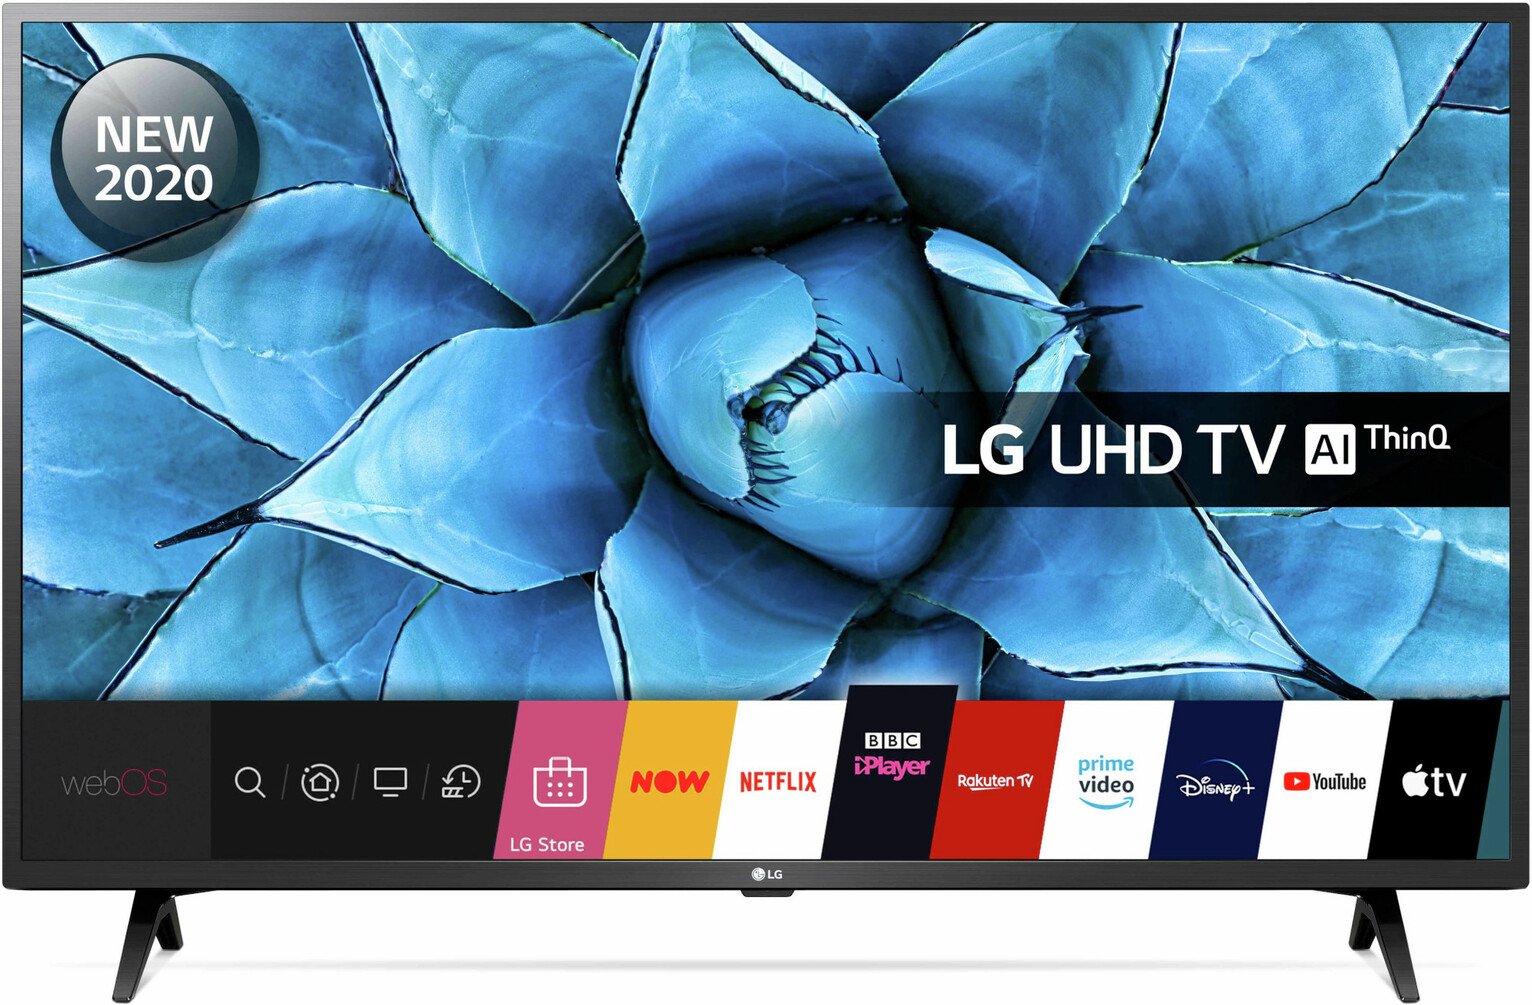 LG 55 Inch 55UN7300 Smart 4K Ultra HD LED TV with HDR Review